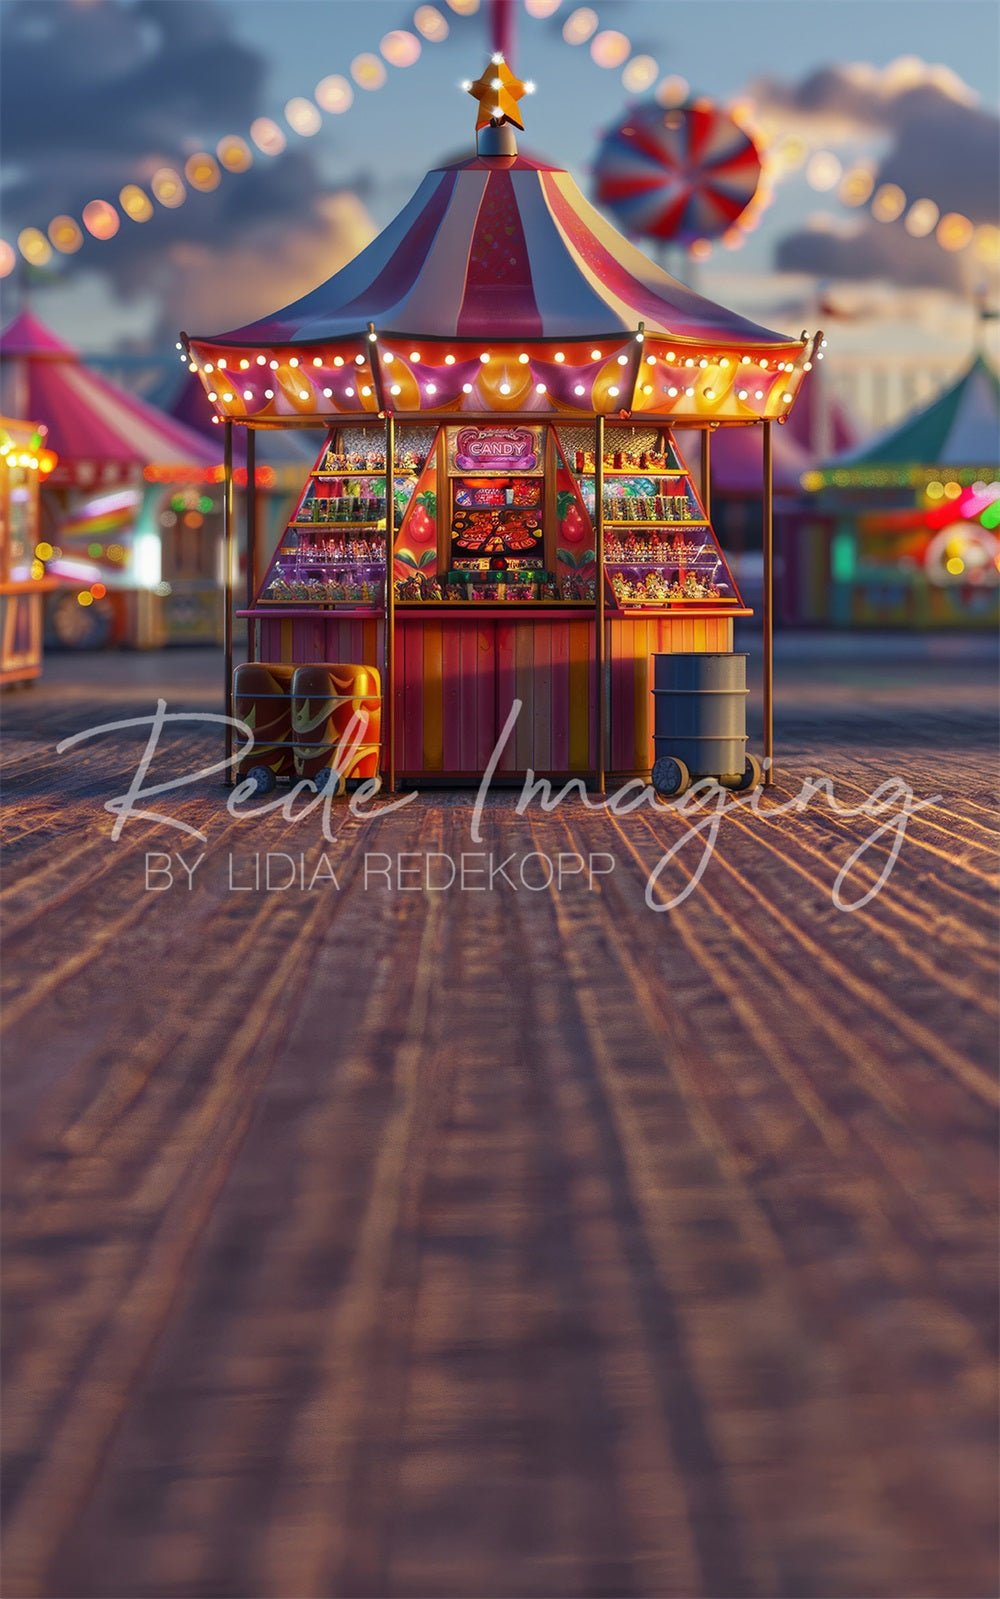 Kate Modern Carnival Circus Candy Store Backdrop Designed by Lidia Redekopp